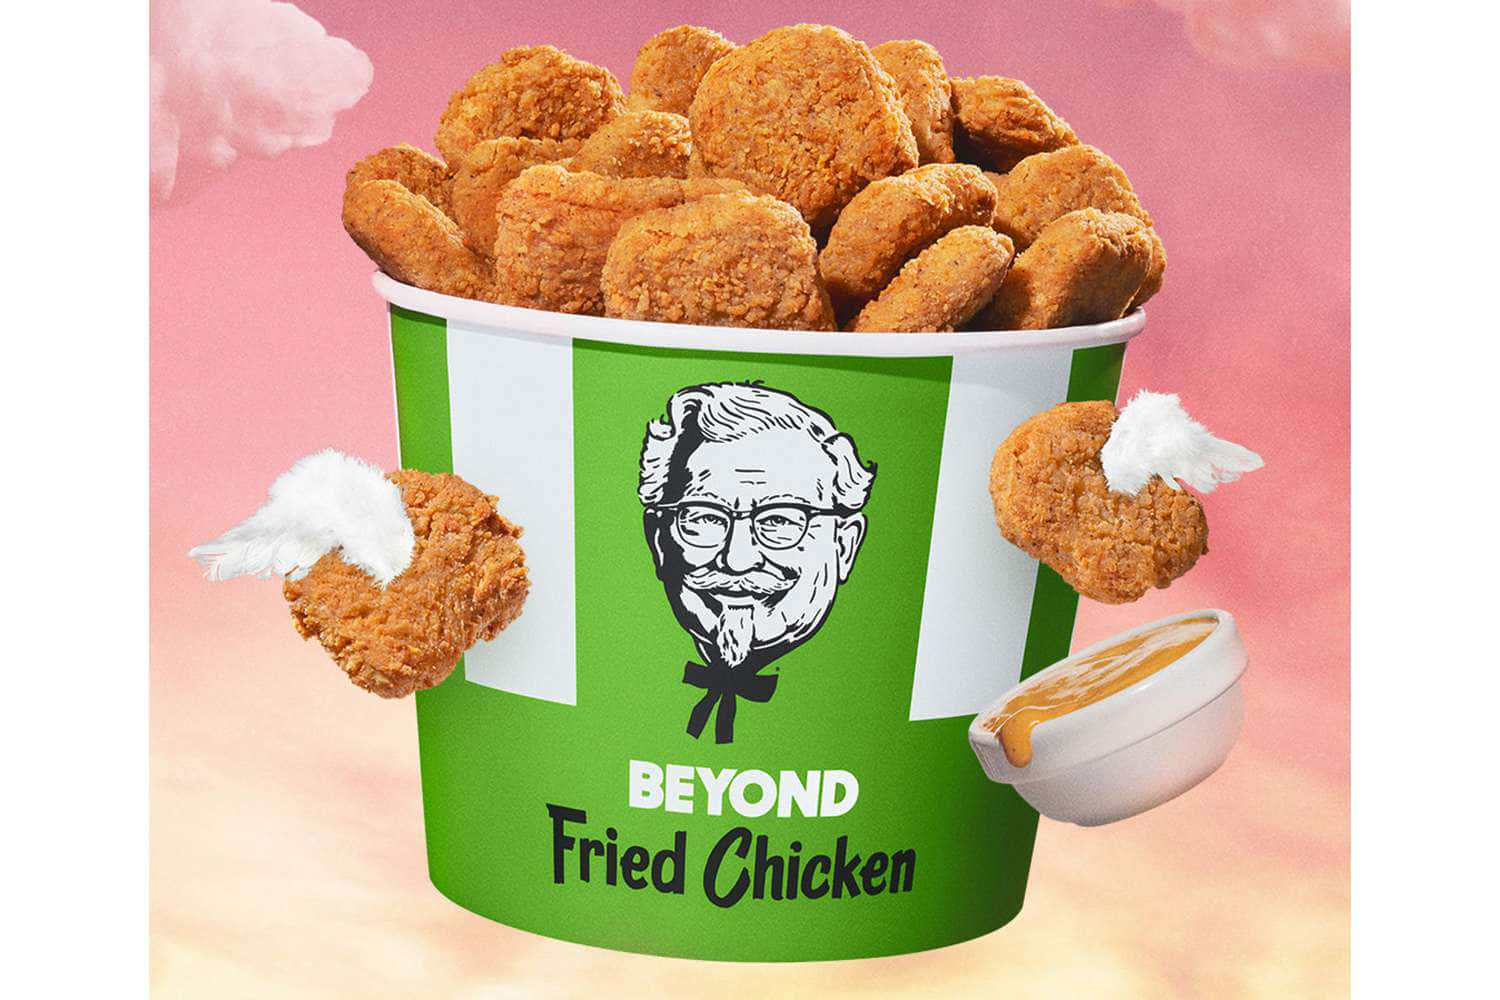 Savoury KFC chicken meal, the symbol of mouthwatering fast food